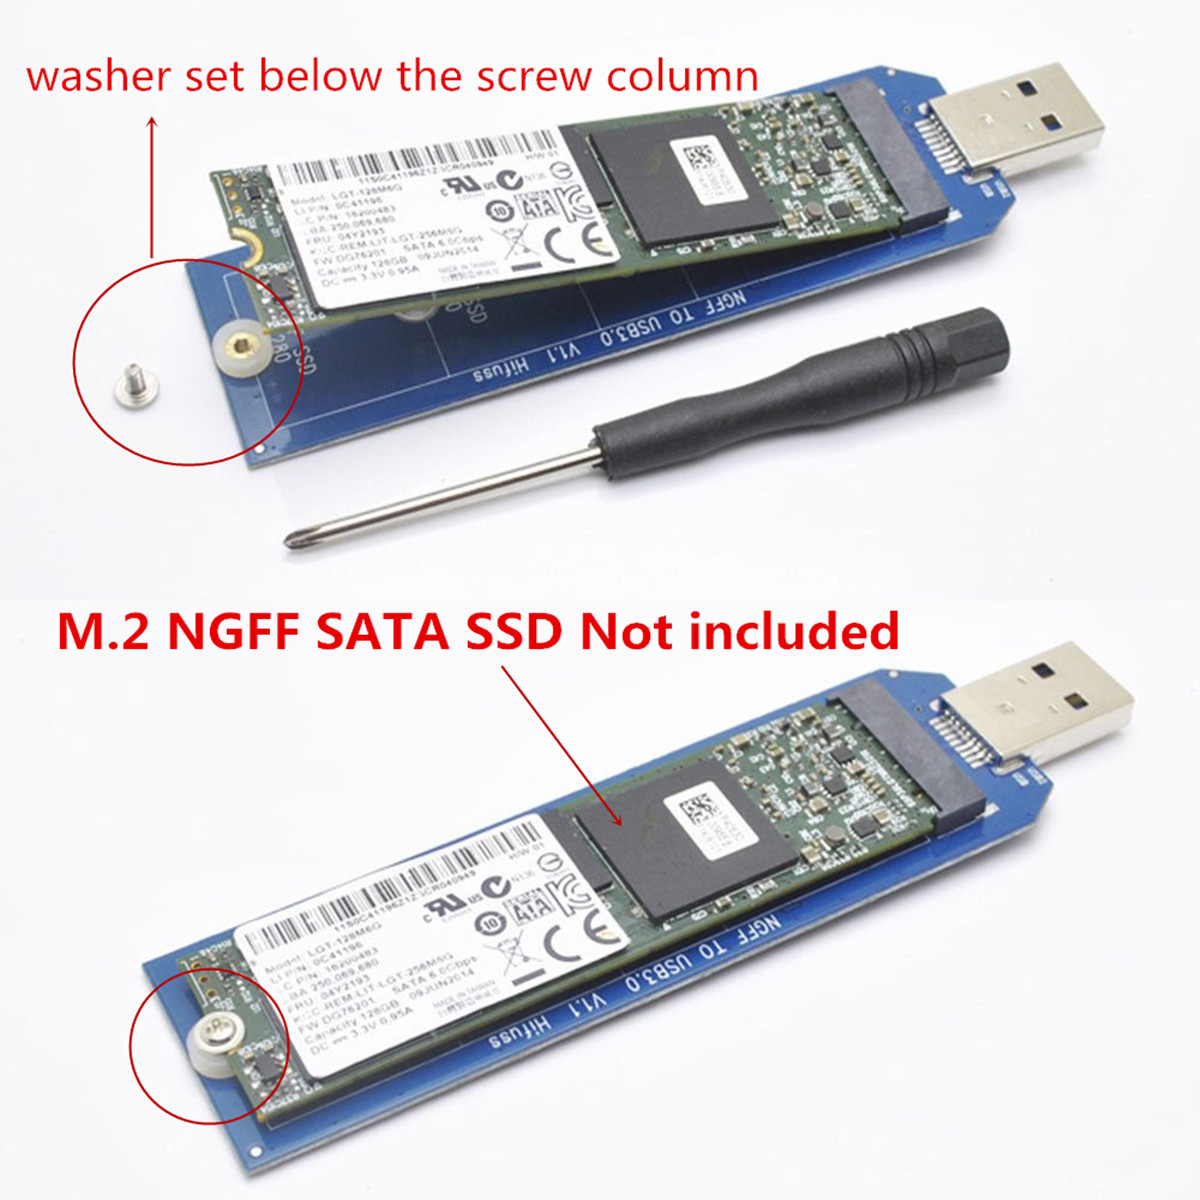 M.2 NGFF SSD SATA to USB 3.0 Converter Adapter External Enclosure Mobile SSD Case 42